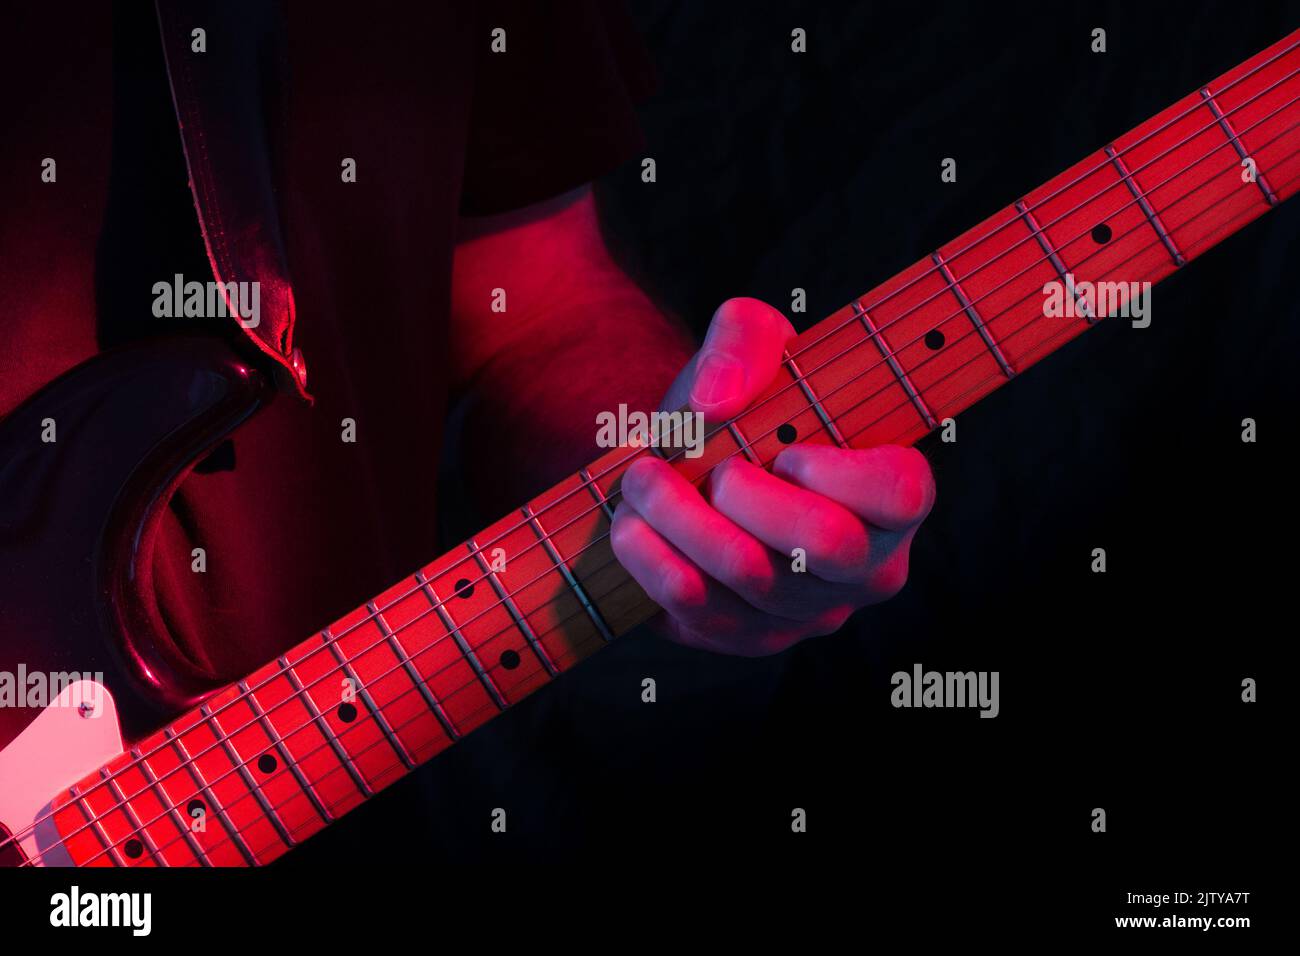 Electric guitar player in red stage lighting with dark to black background. Low key shot. Stock Photo